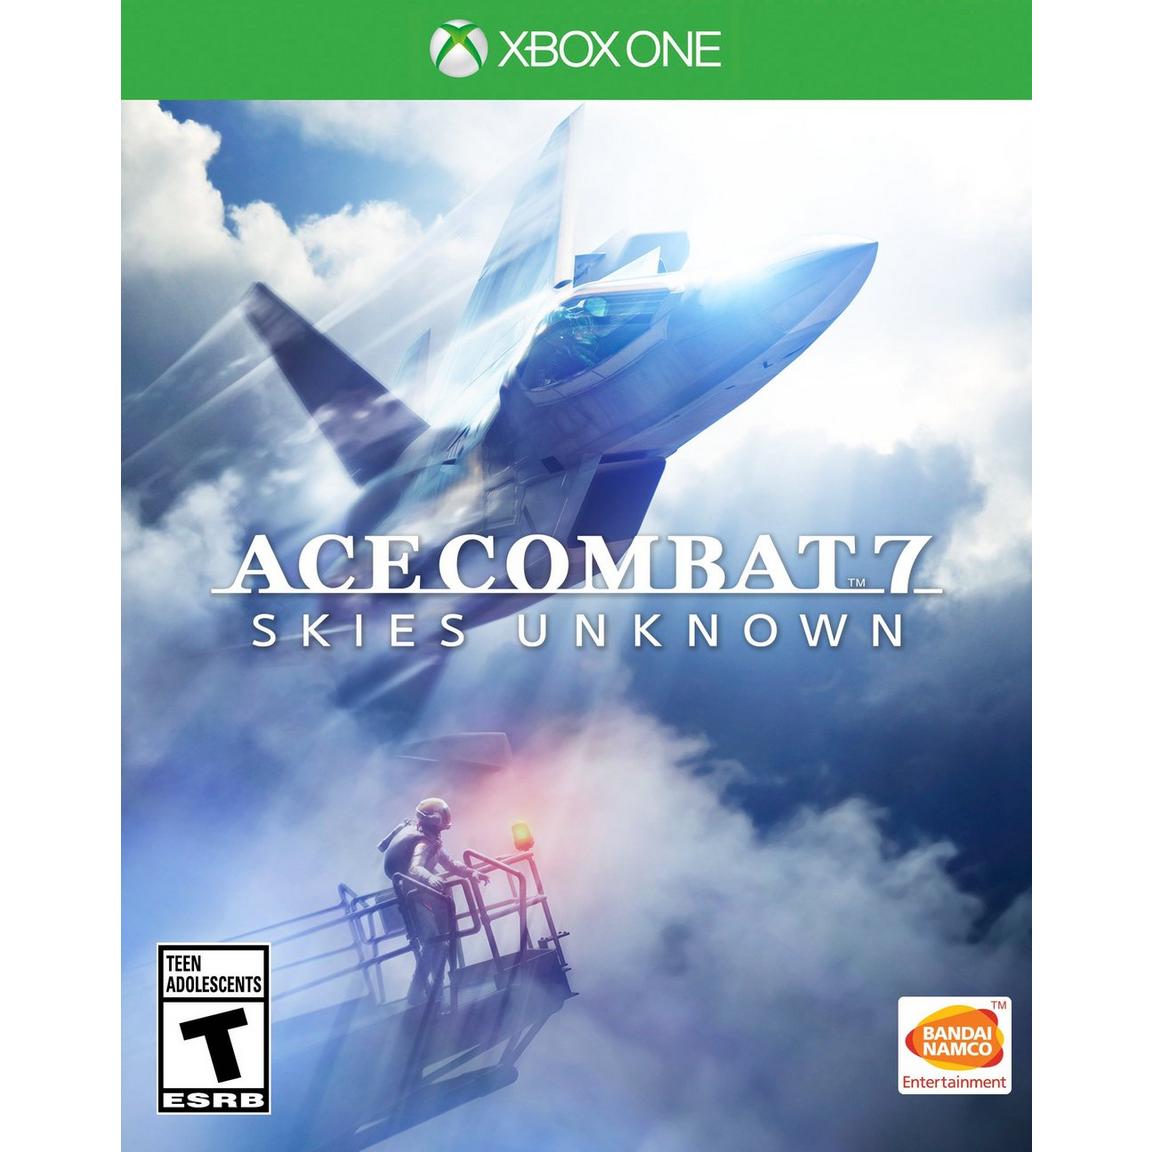 Ace Combat 7: Skies Unknown - Xbox One -  Bandai, G3Q-00652